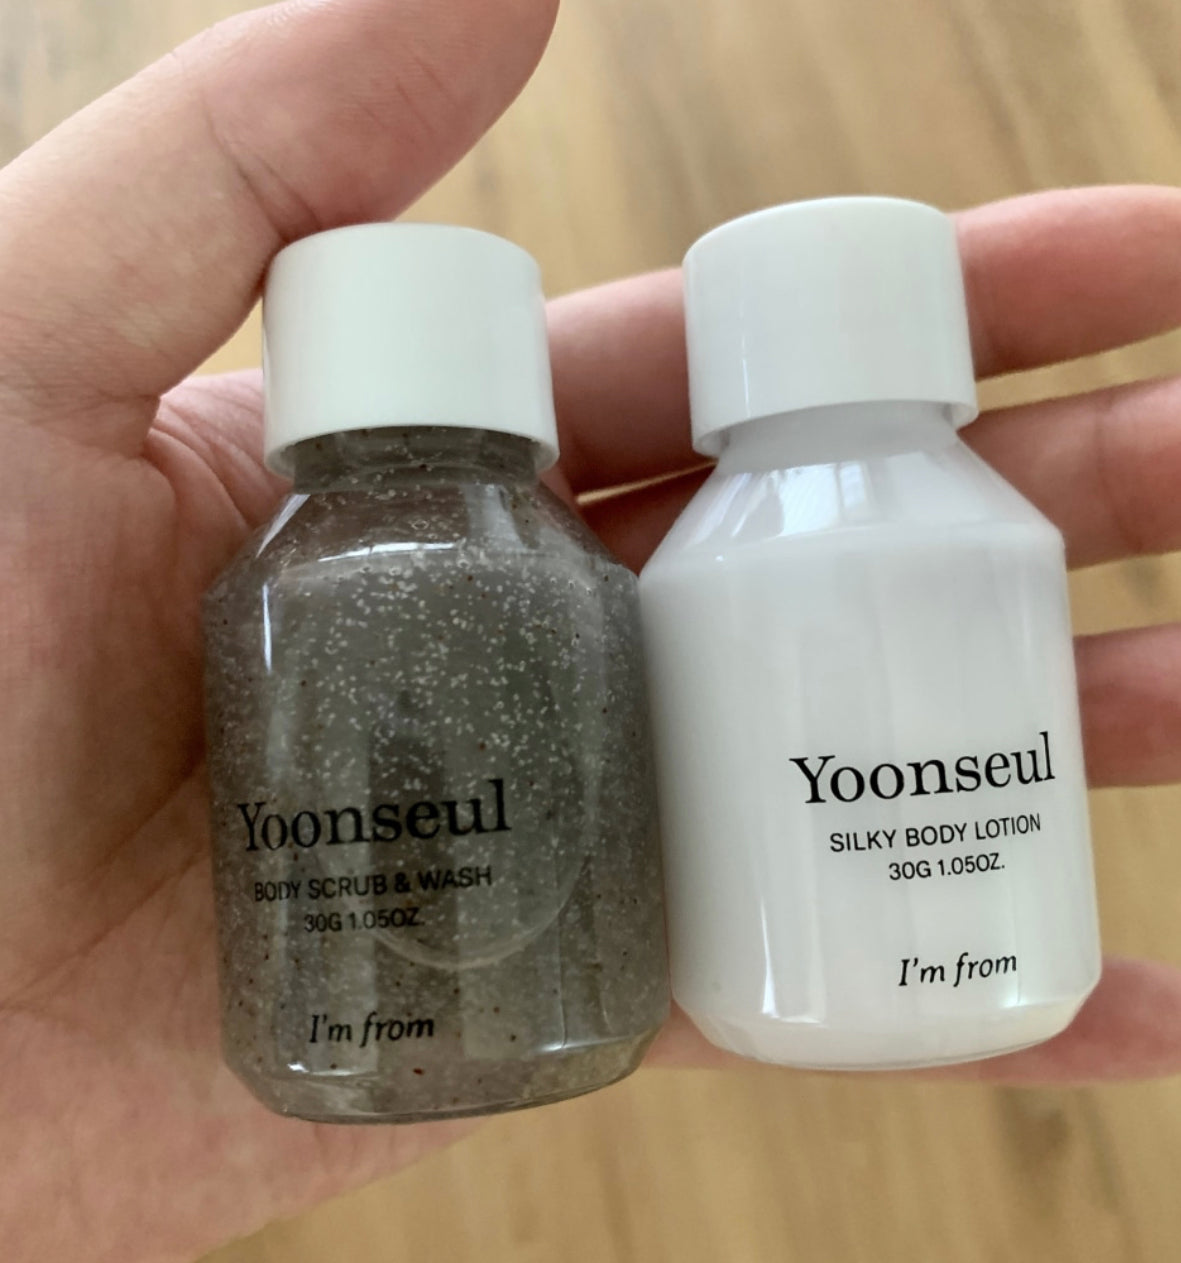 I'M FROM yoonseul body discovery kit